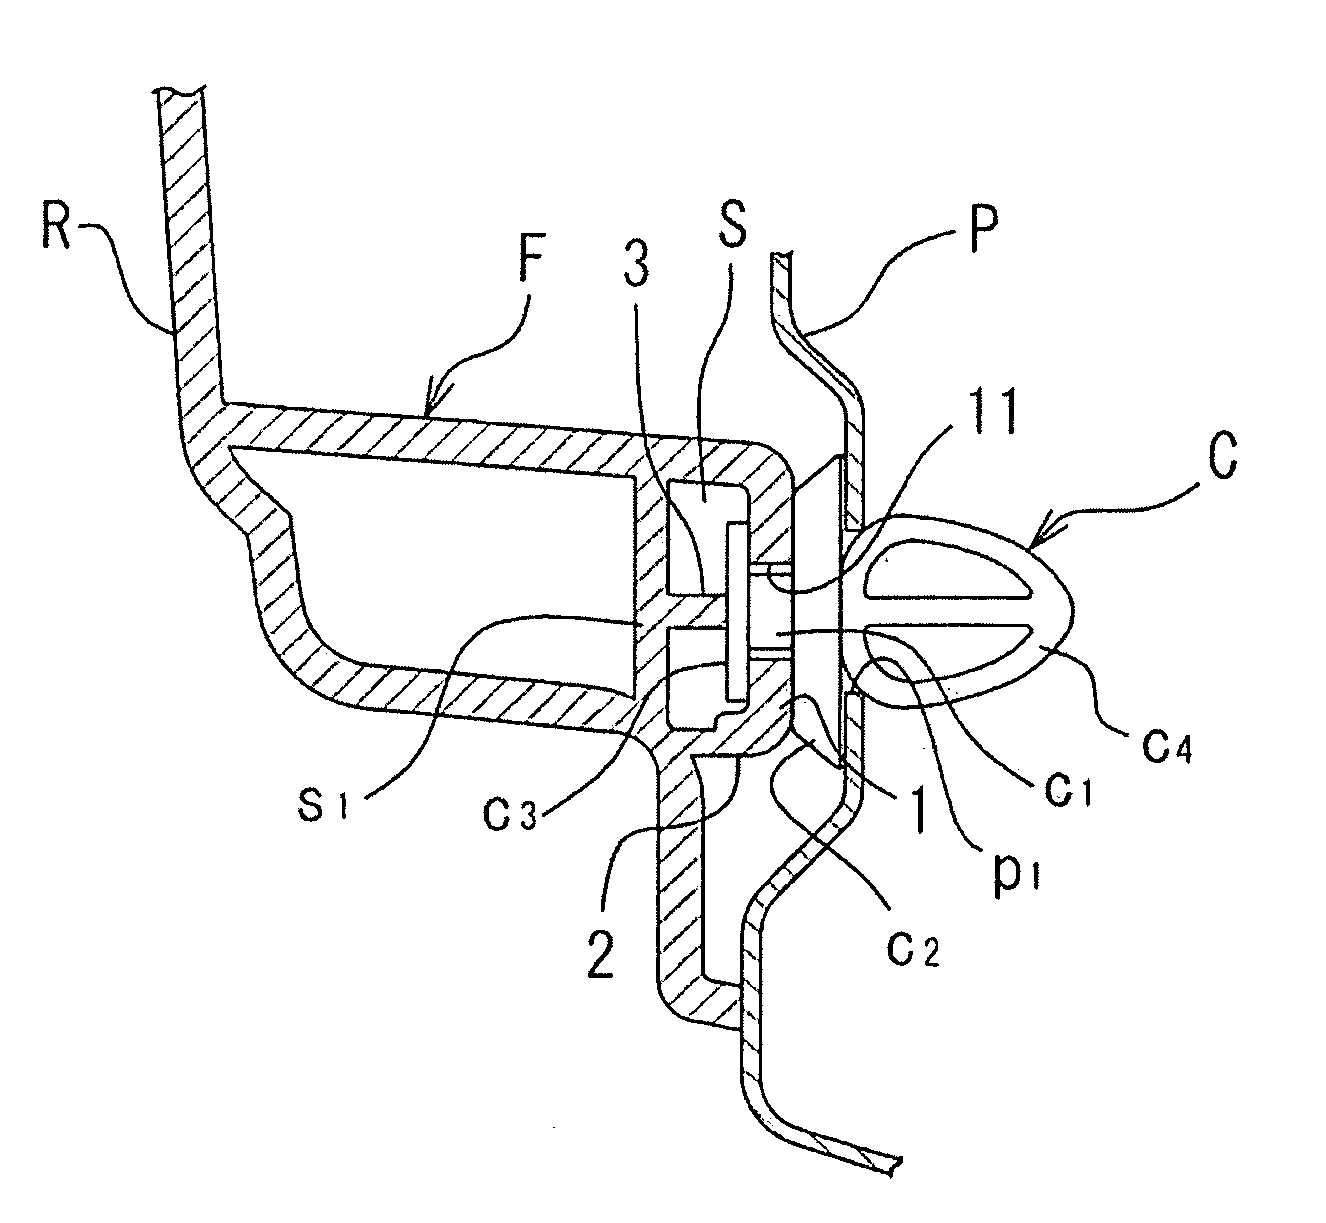 Clip-Mounting Seat and Vehicle Interior Component